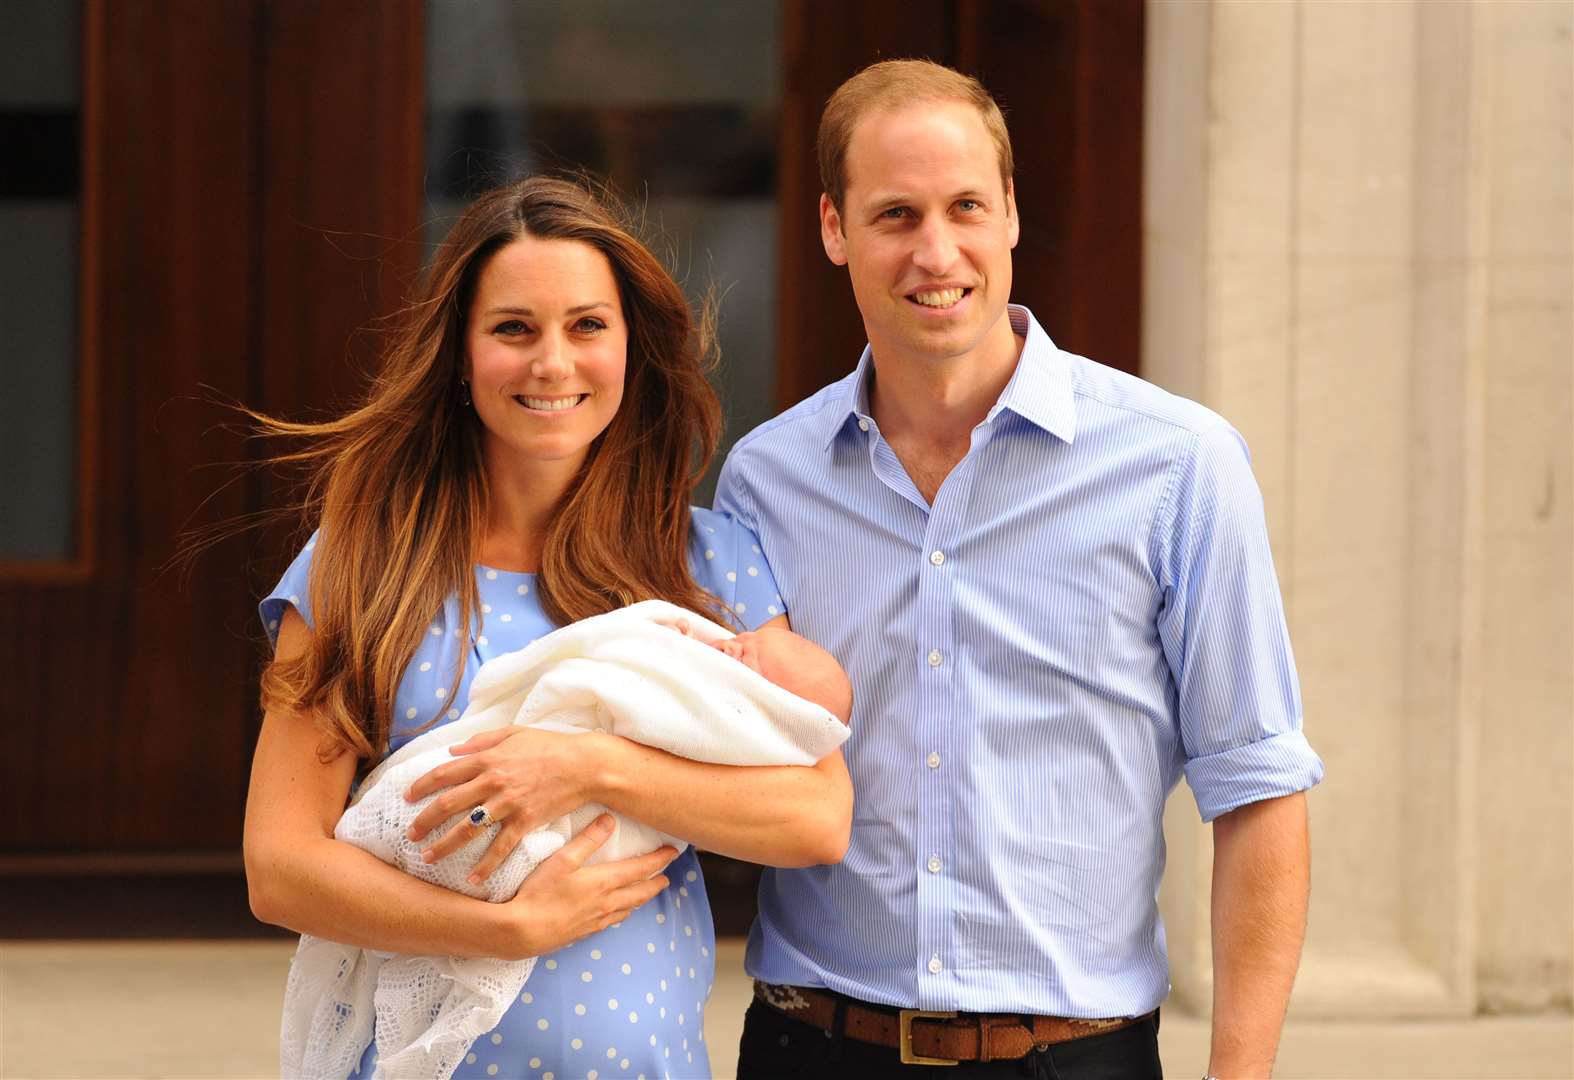 Kate and William with their newborn son in 2013 (Dominic Lipinski/PA)